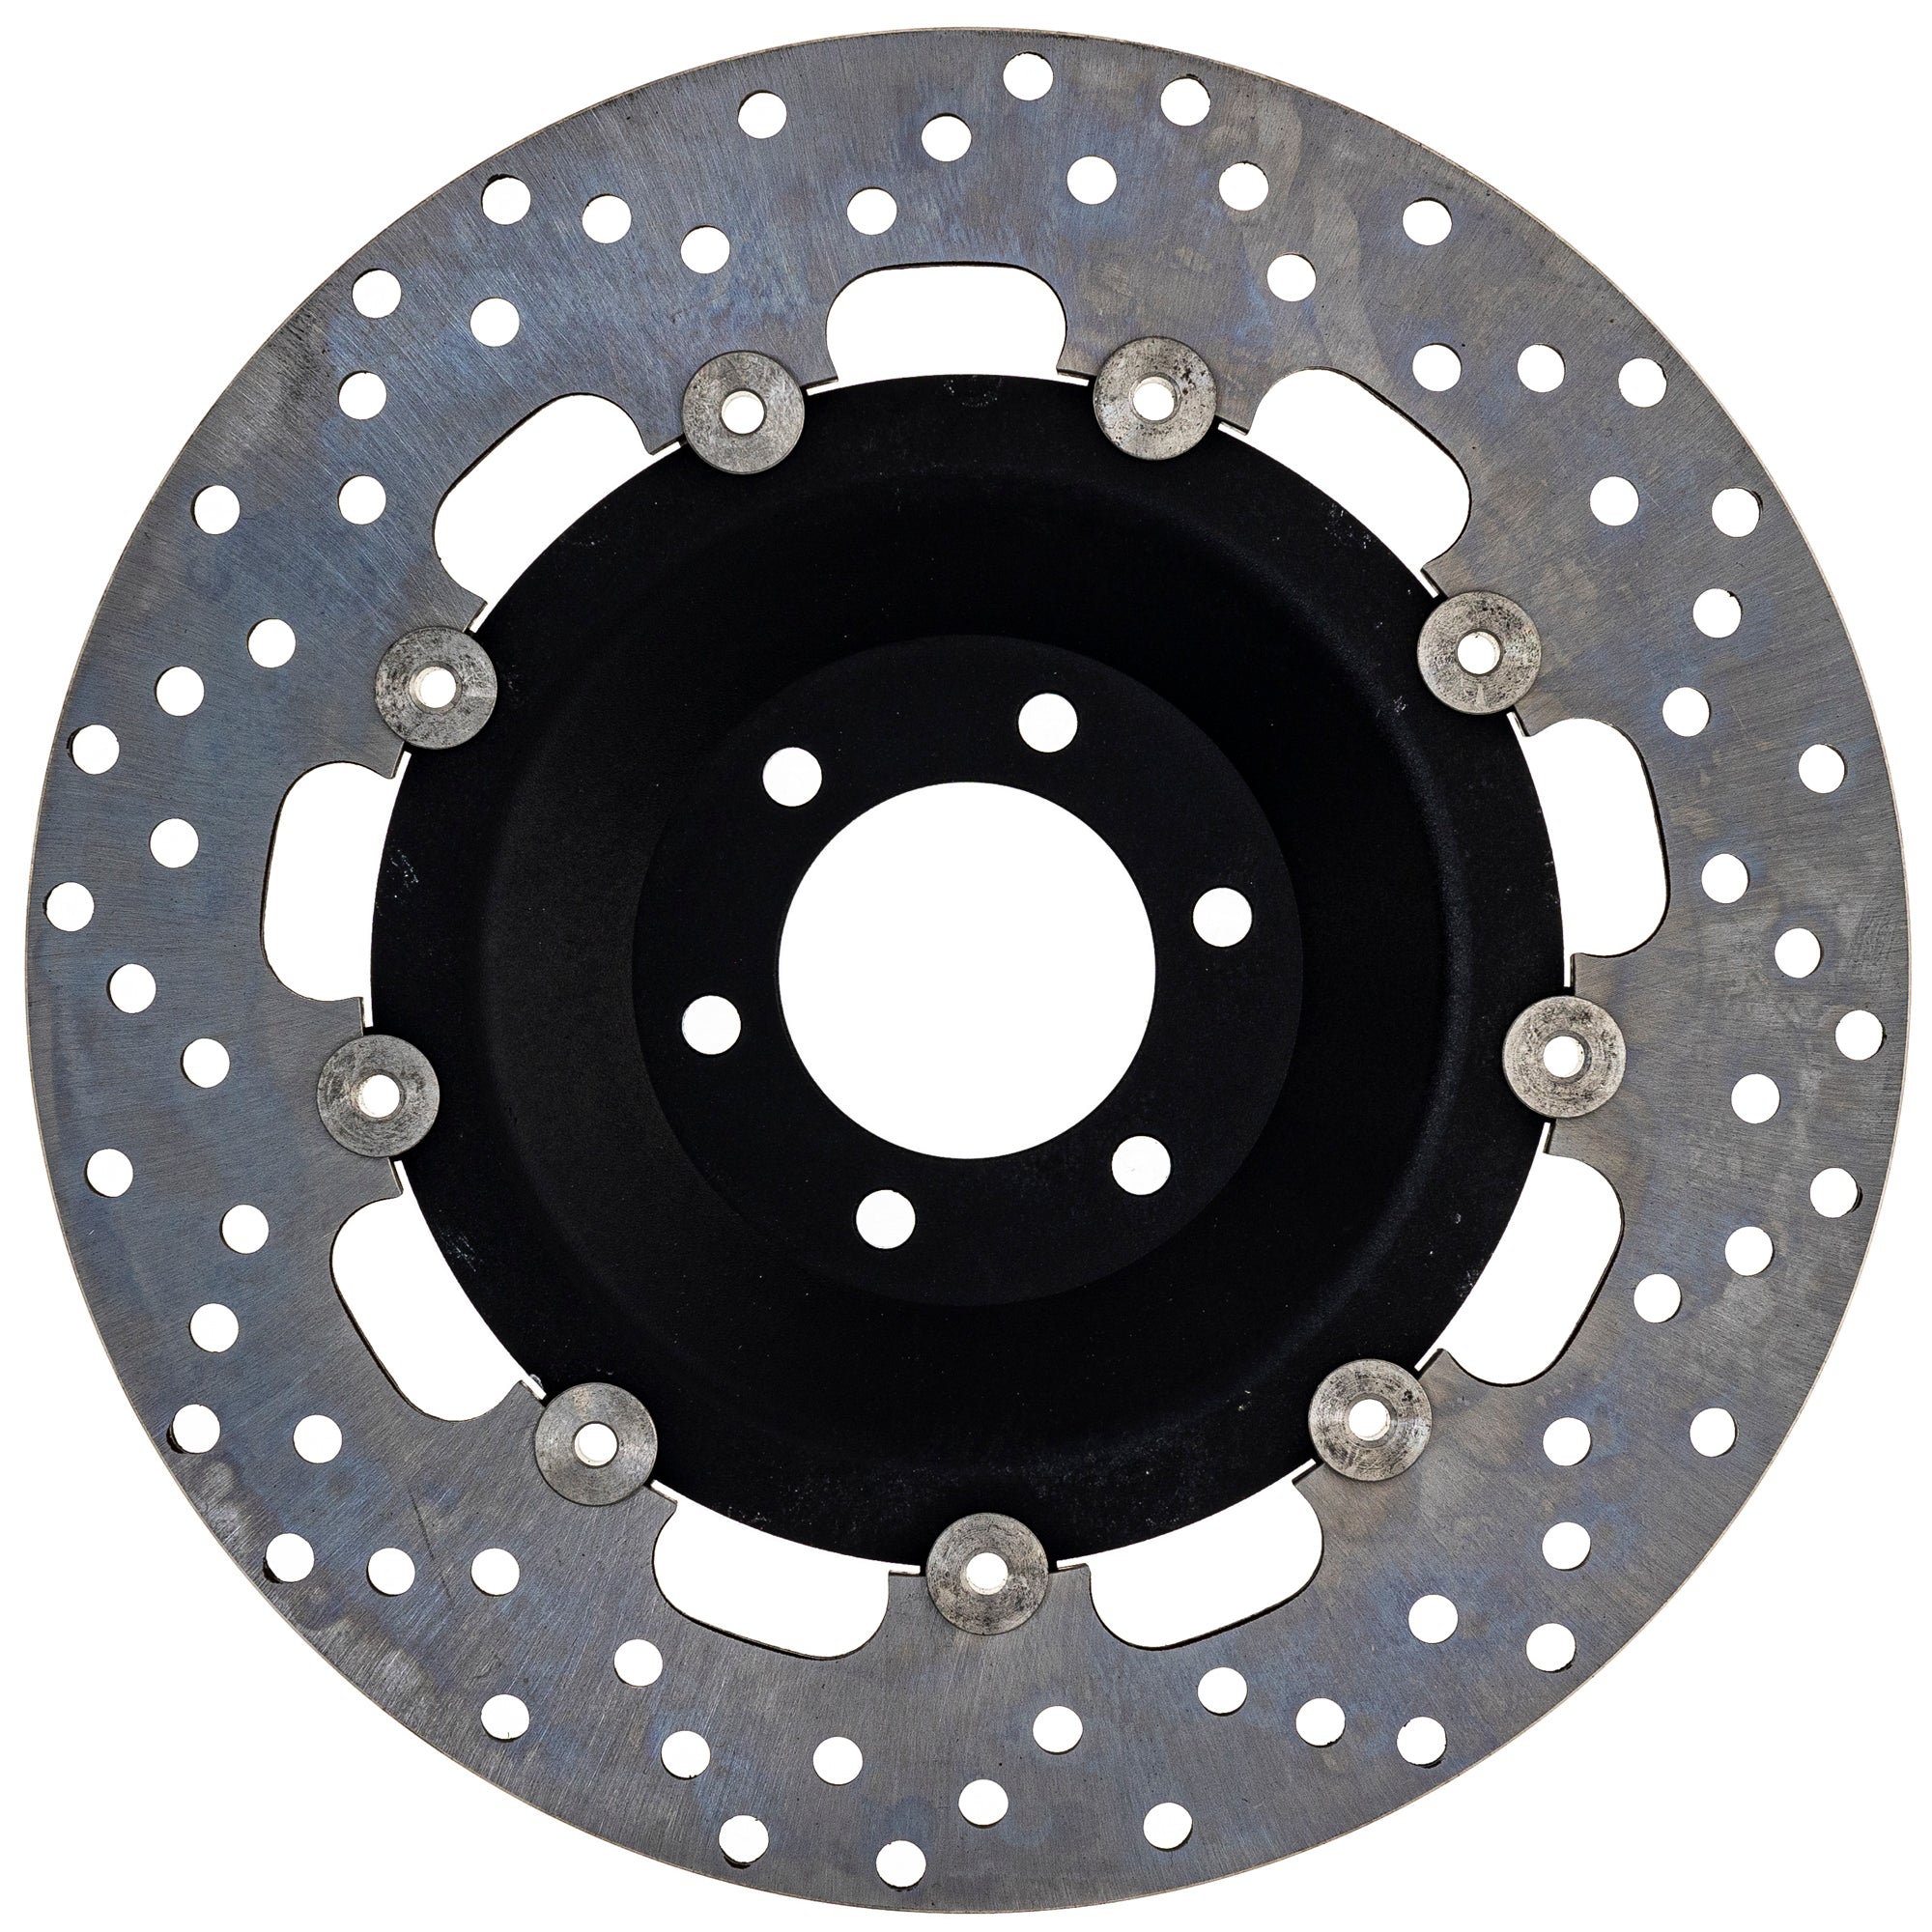 Front Rear Brake Rotor 519-CRT2396R For Suzuki 69211-33250 64211-33250 59221-45260 59221-45250 | 2-PACK